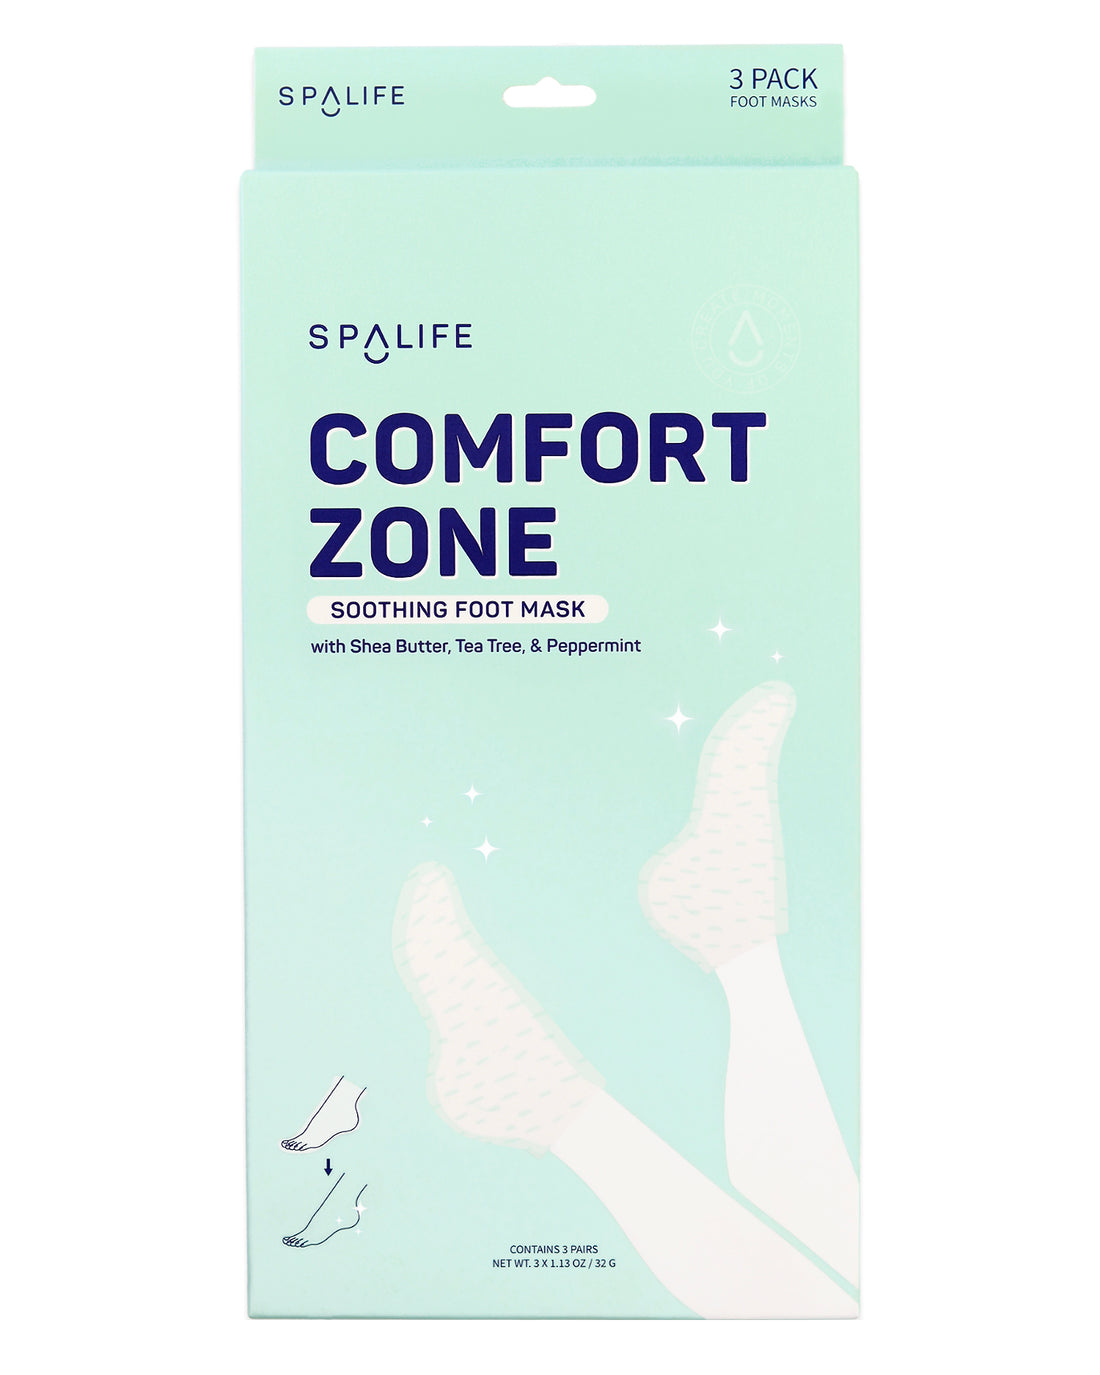 Comfort_zone_soothing_foot_mas-981